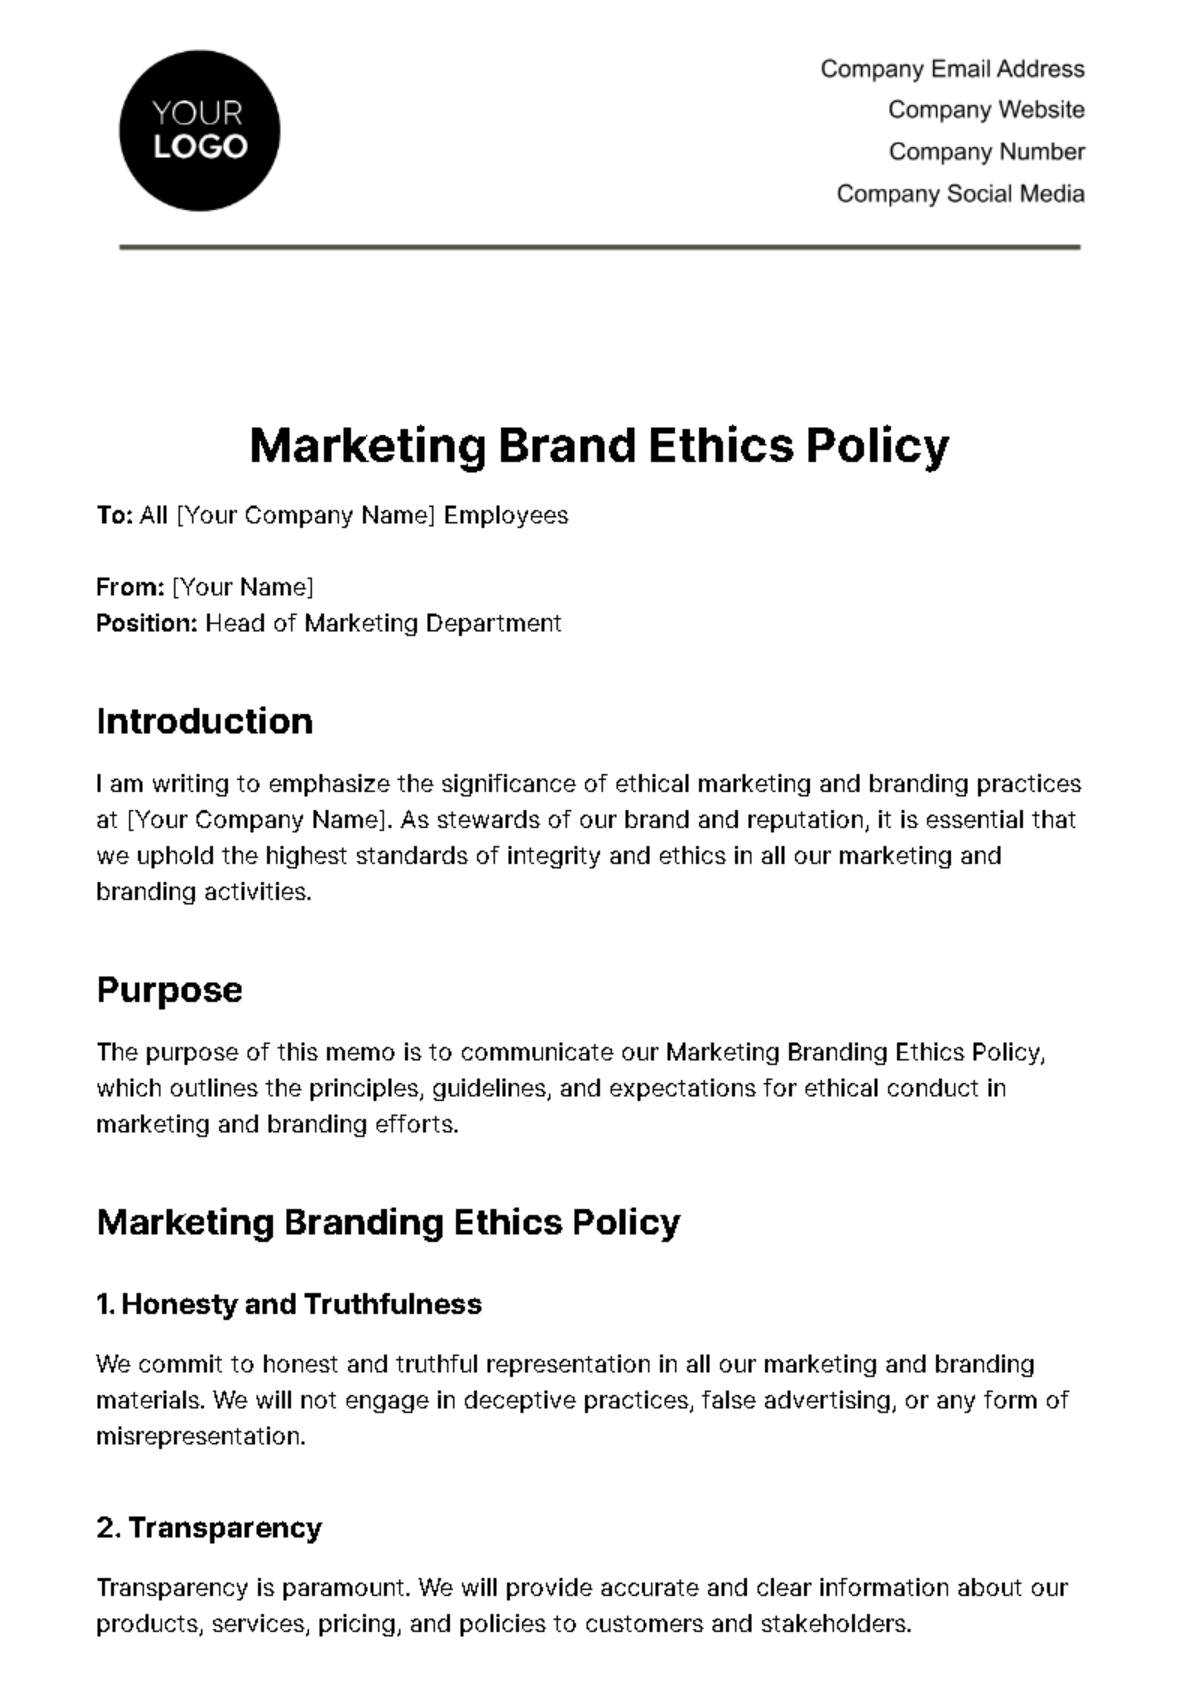 Marketing Branding Ethics Policy Template